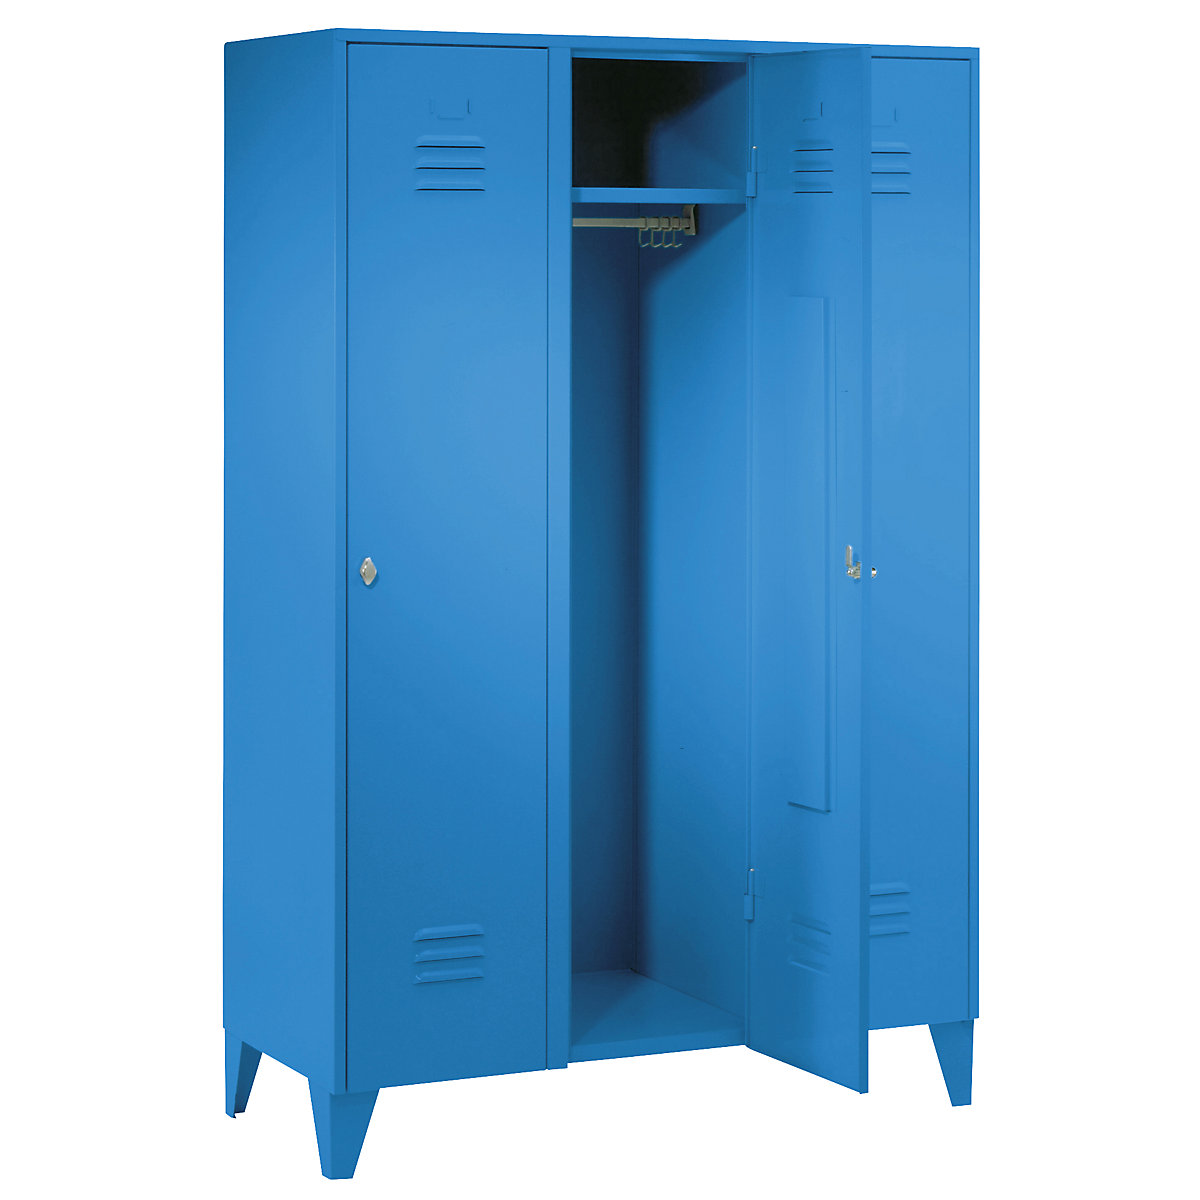 Steel locker with stud feet – Wolf, full height compartments, solid doors, compartment width 400 mm, 3 compartments, light blue-57